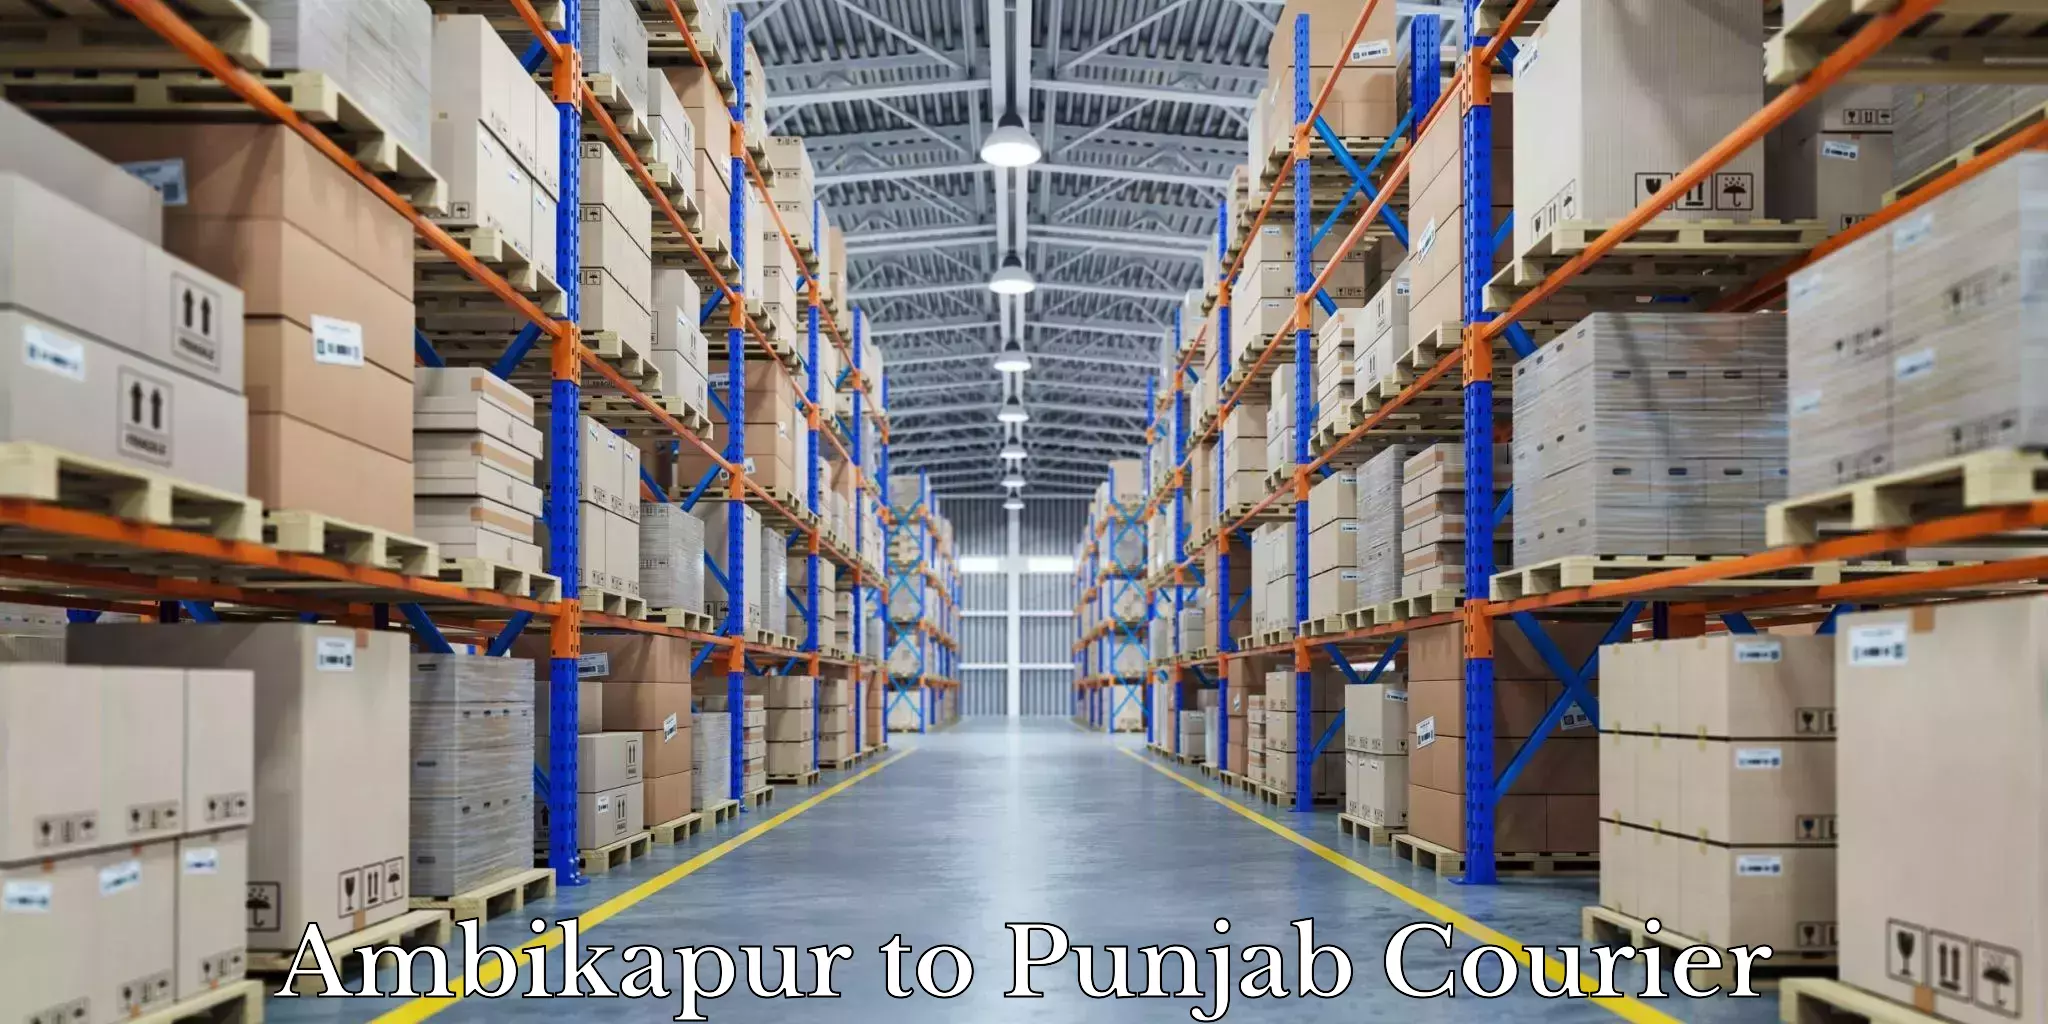 Moving and packing experts Ambikapur to Jagraon